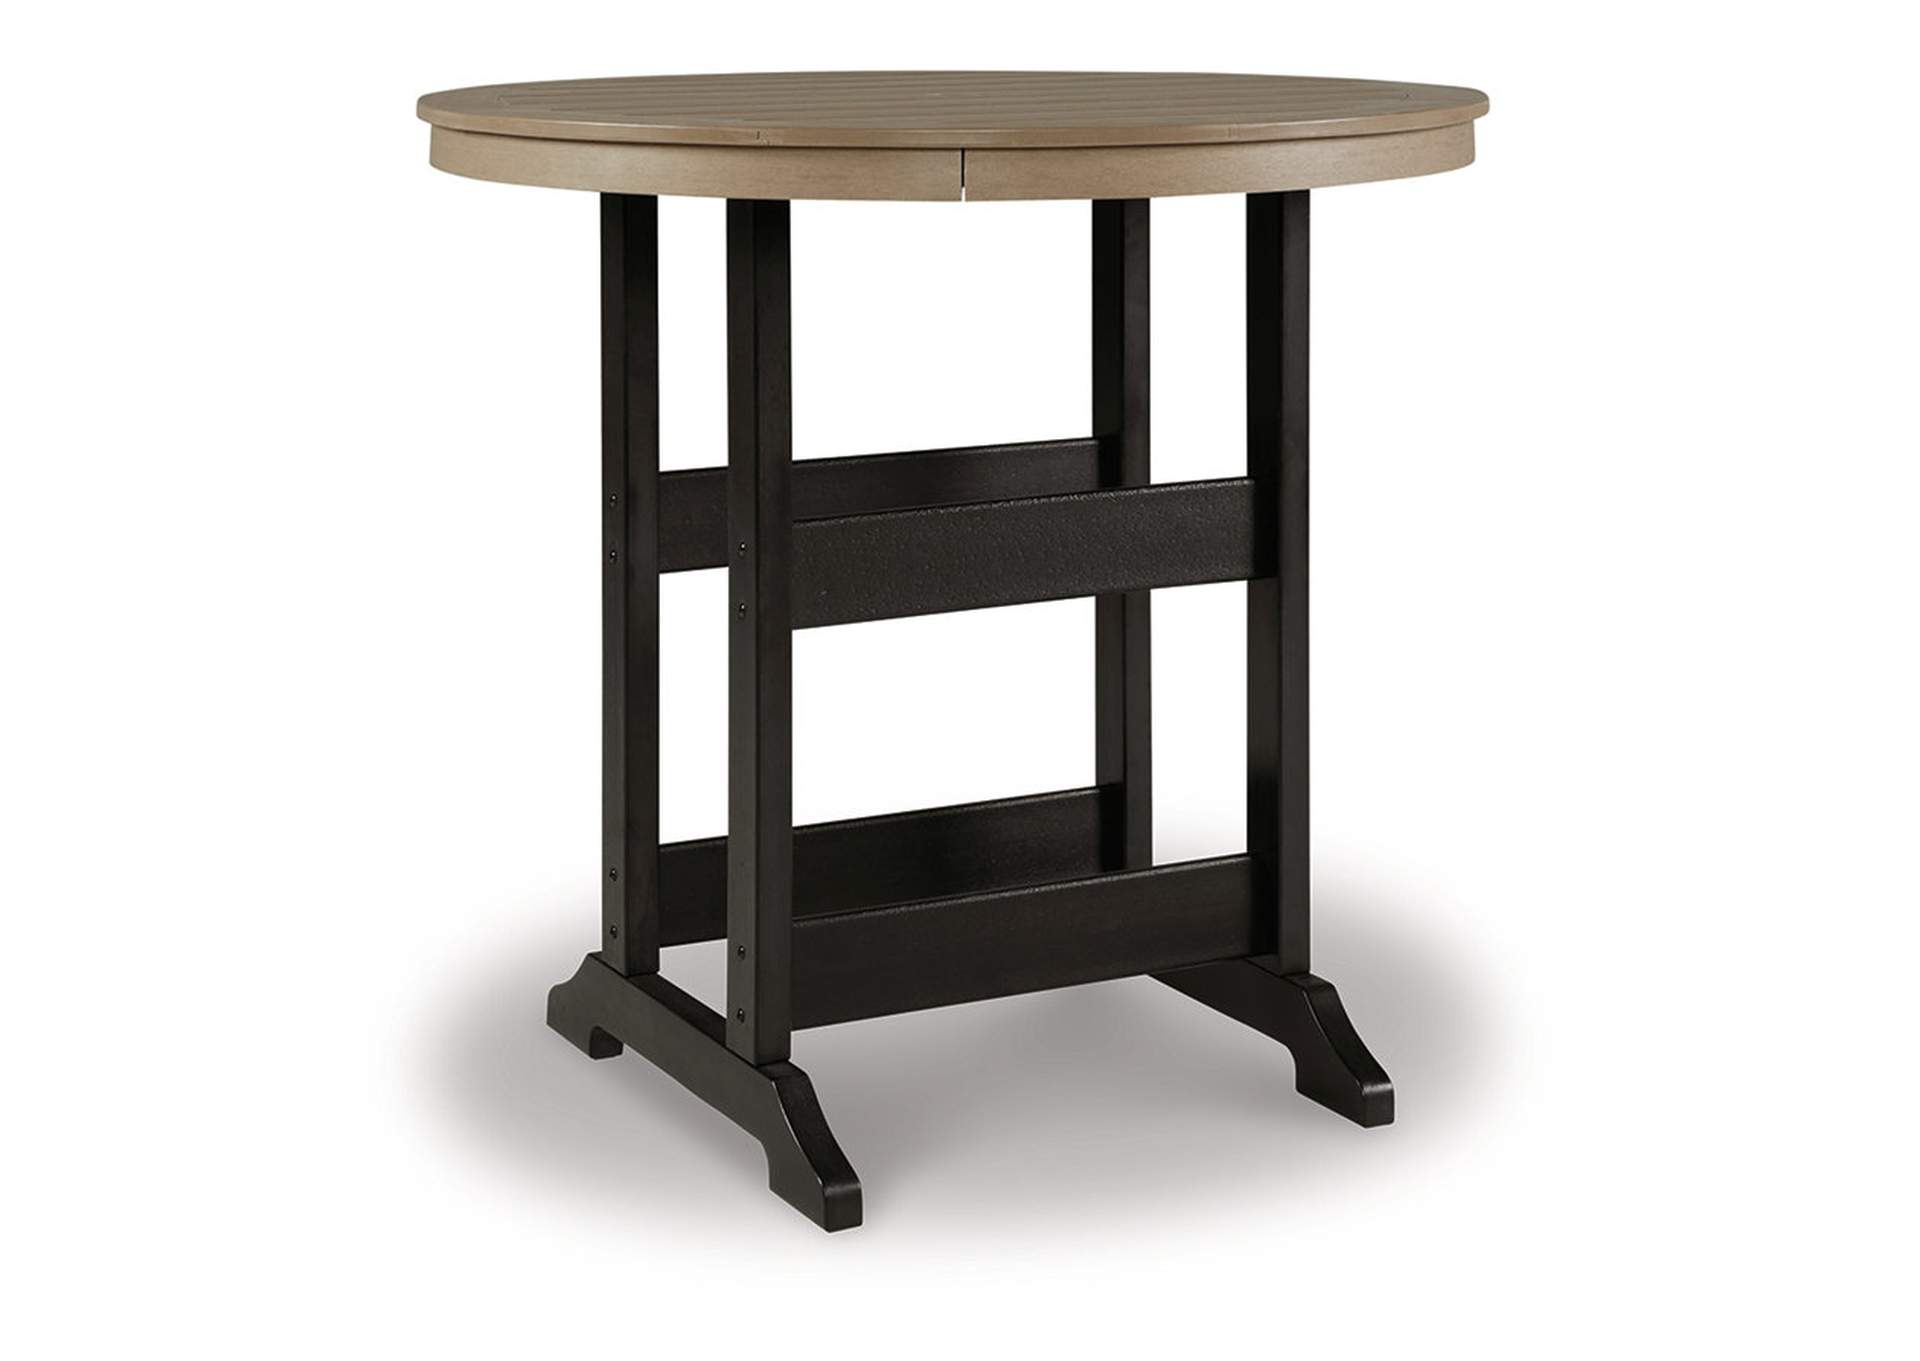 Fairen Trail Outdoor Bar Table and 2 Barstools,Outdoor By Ashley